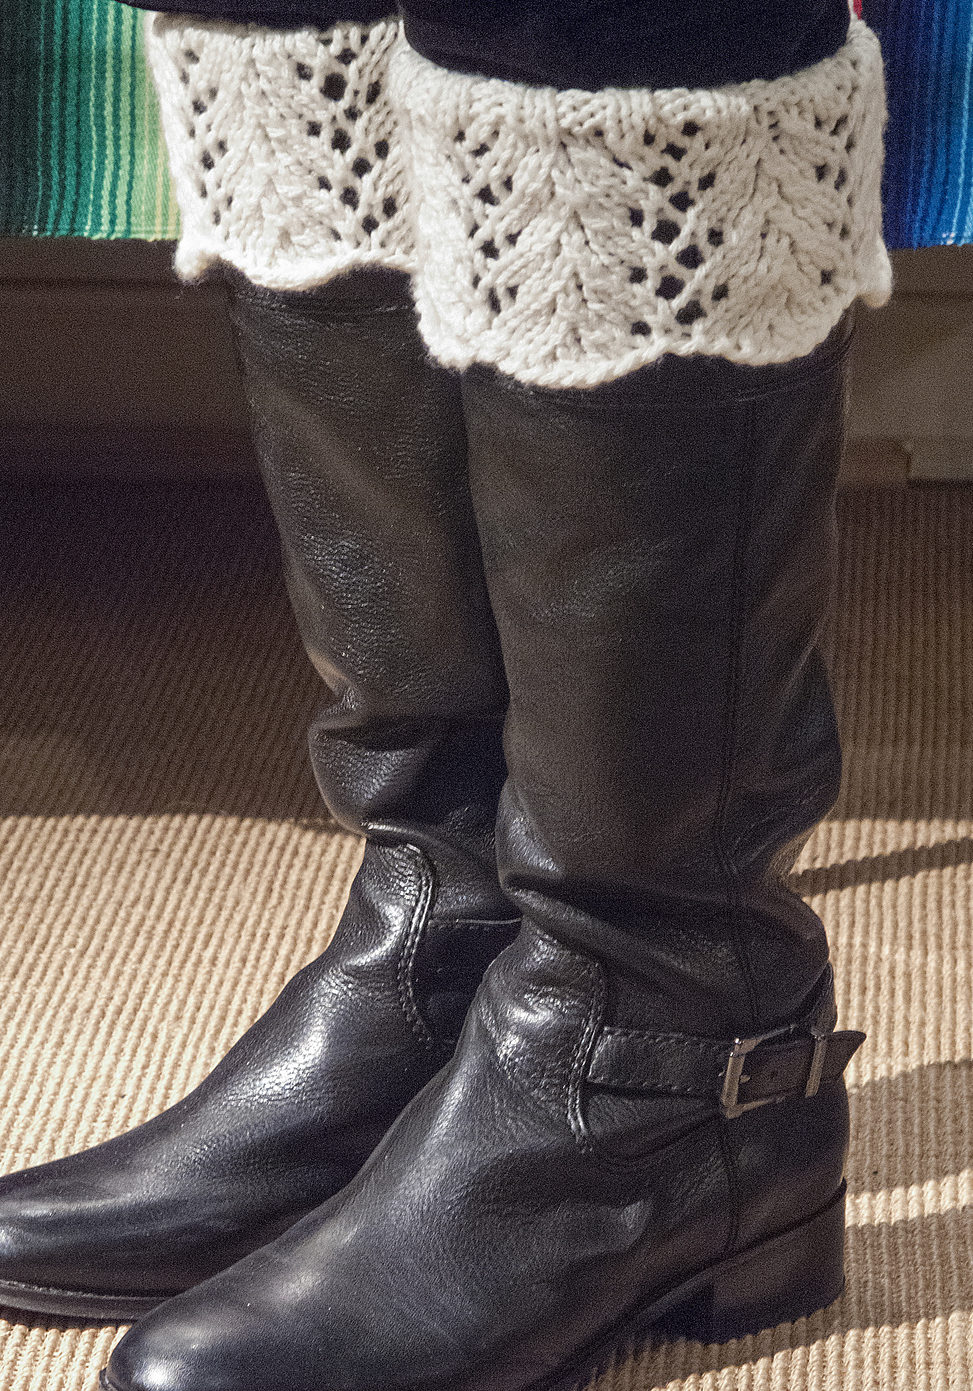 Free Knitting Pattern for Feather Lace Boot Toppers